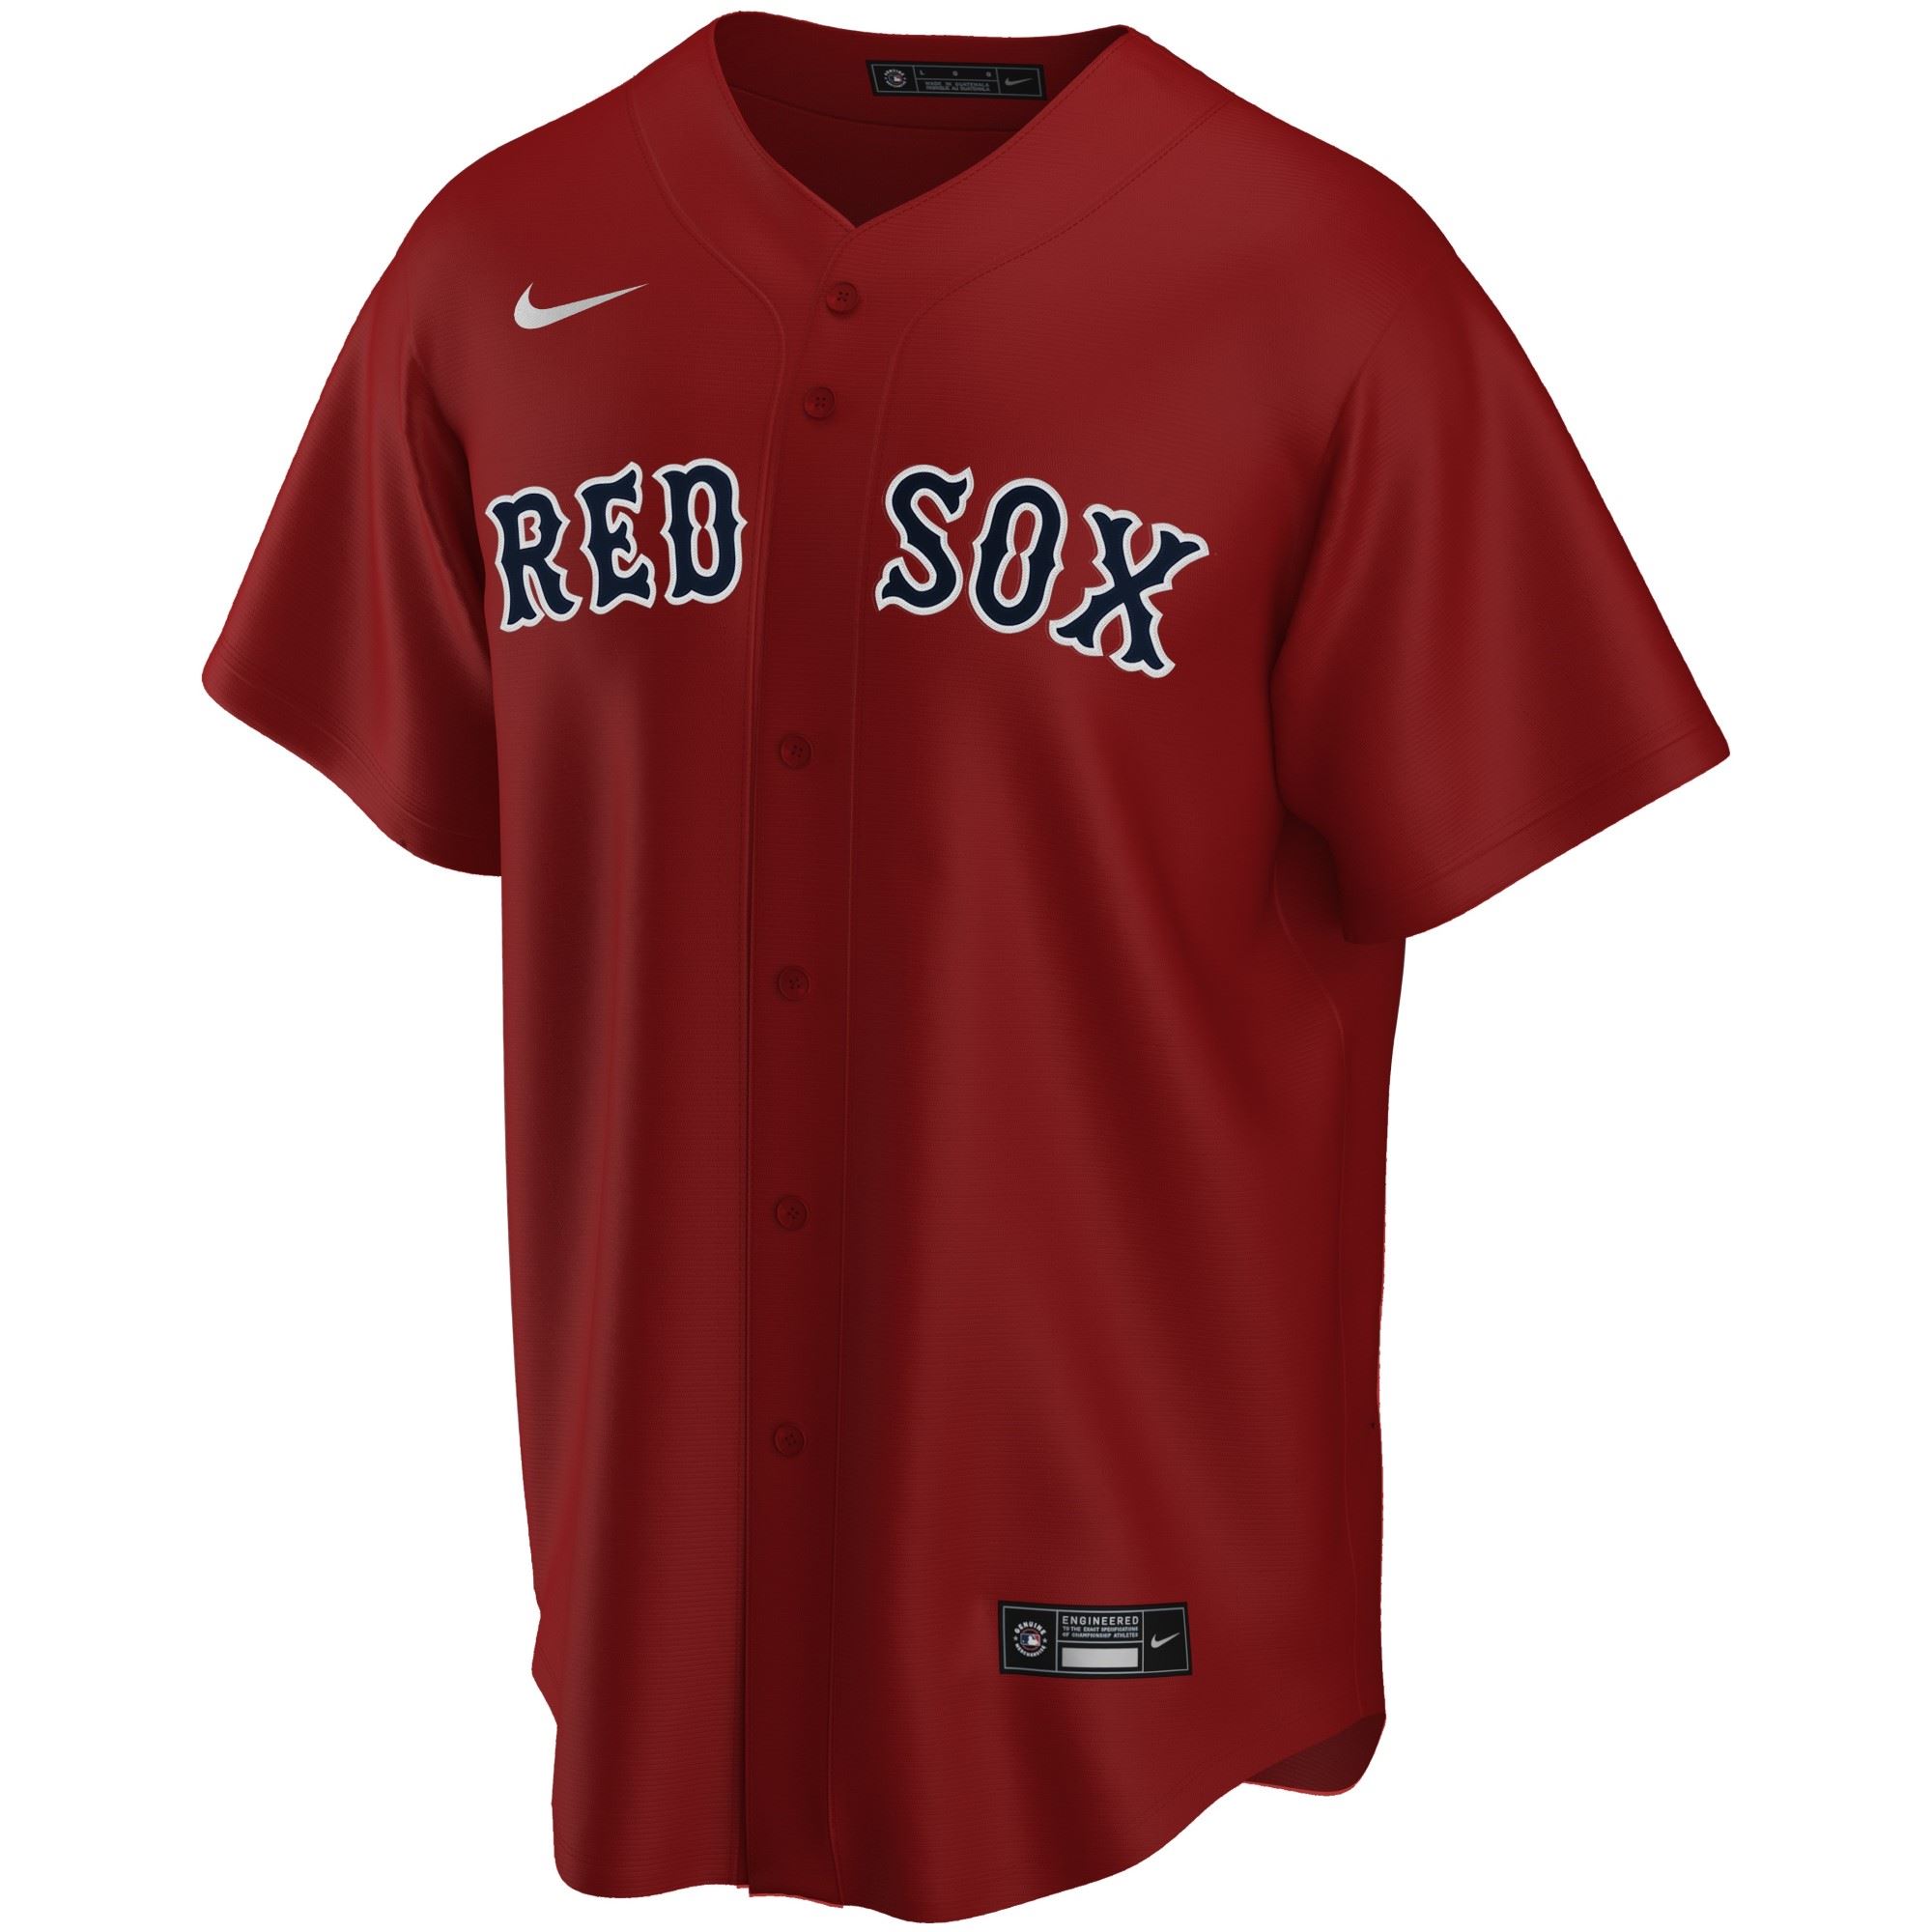 Boston Red Sox Official MLB Replica Alternate Jersey Scarlet Nike